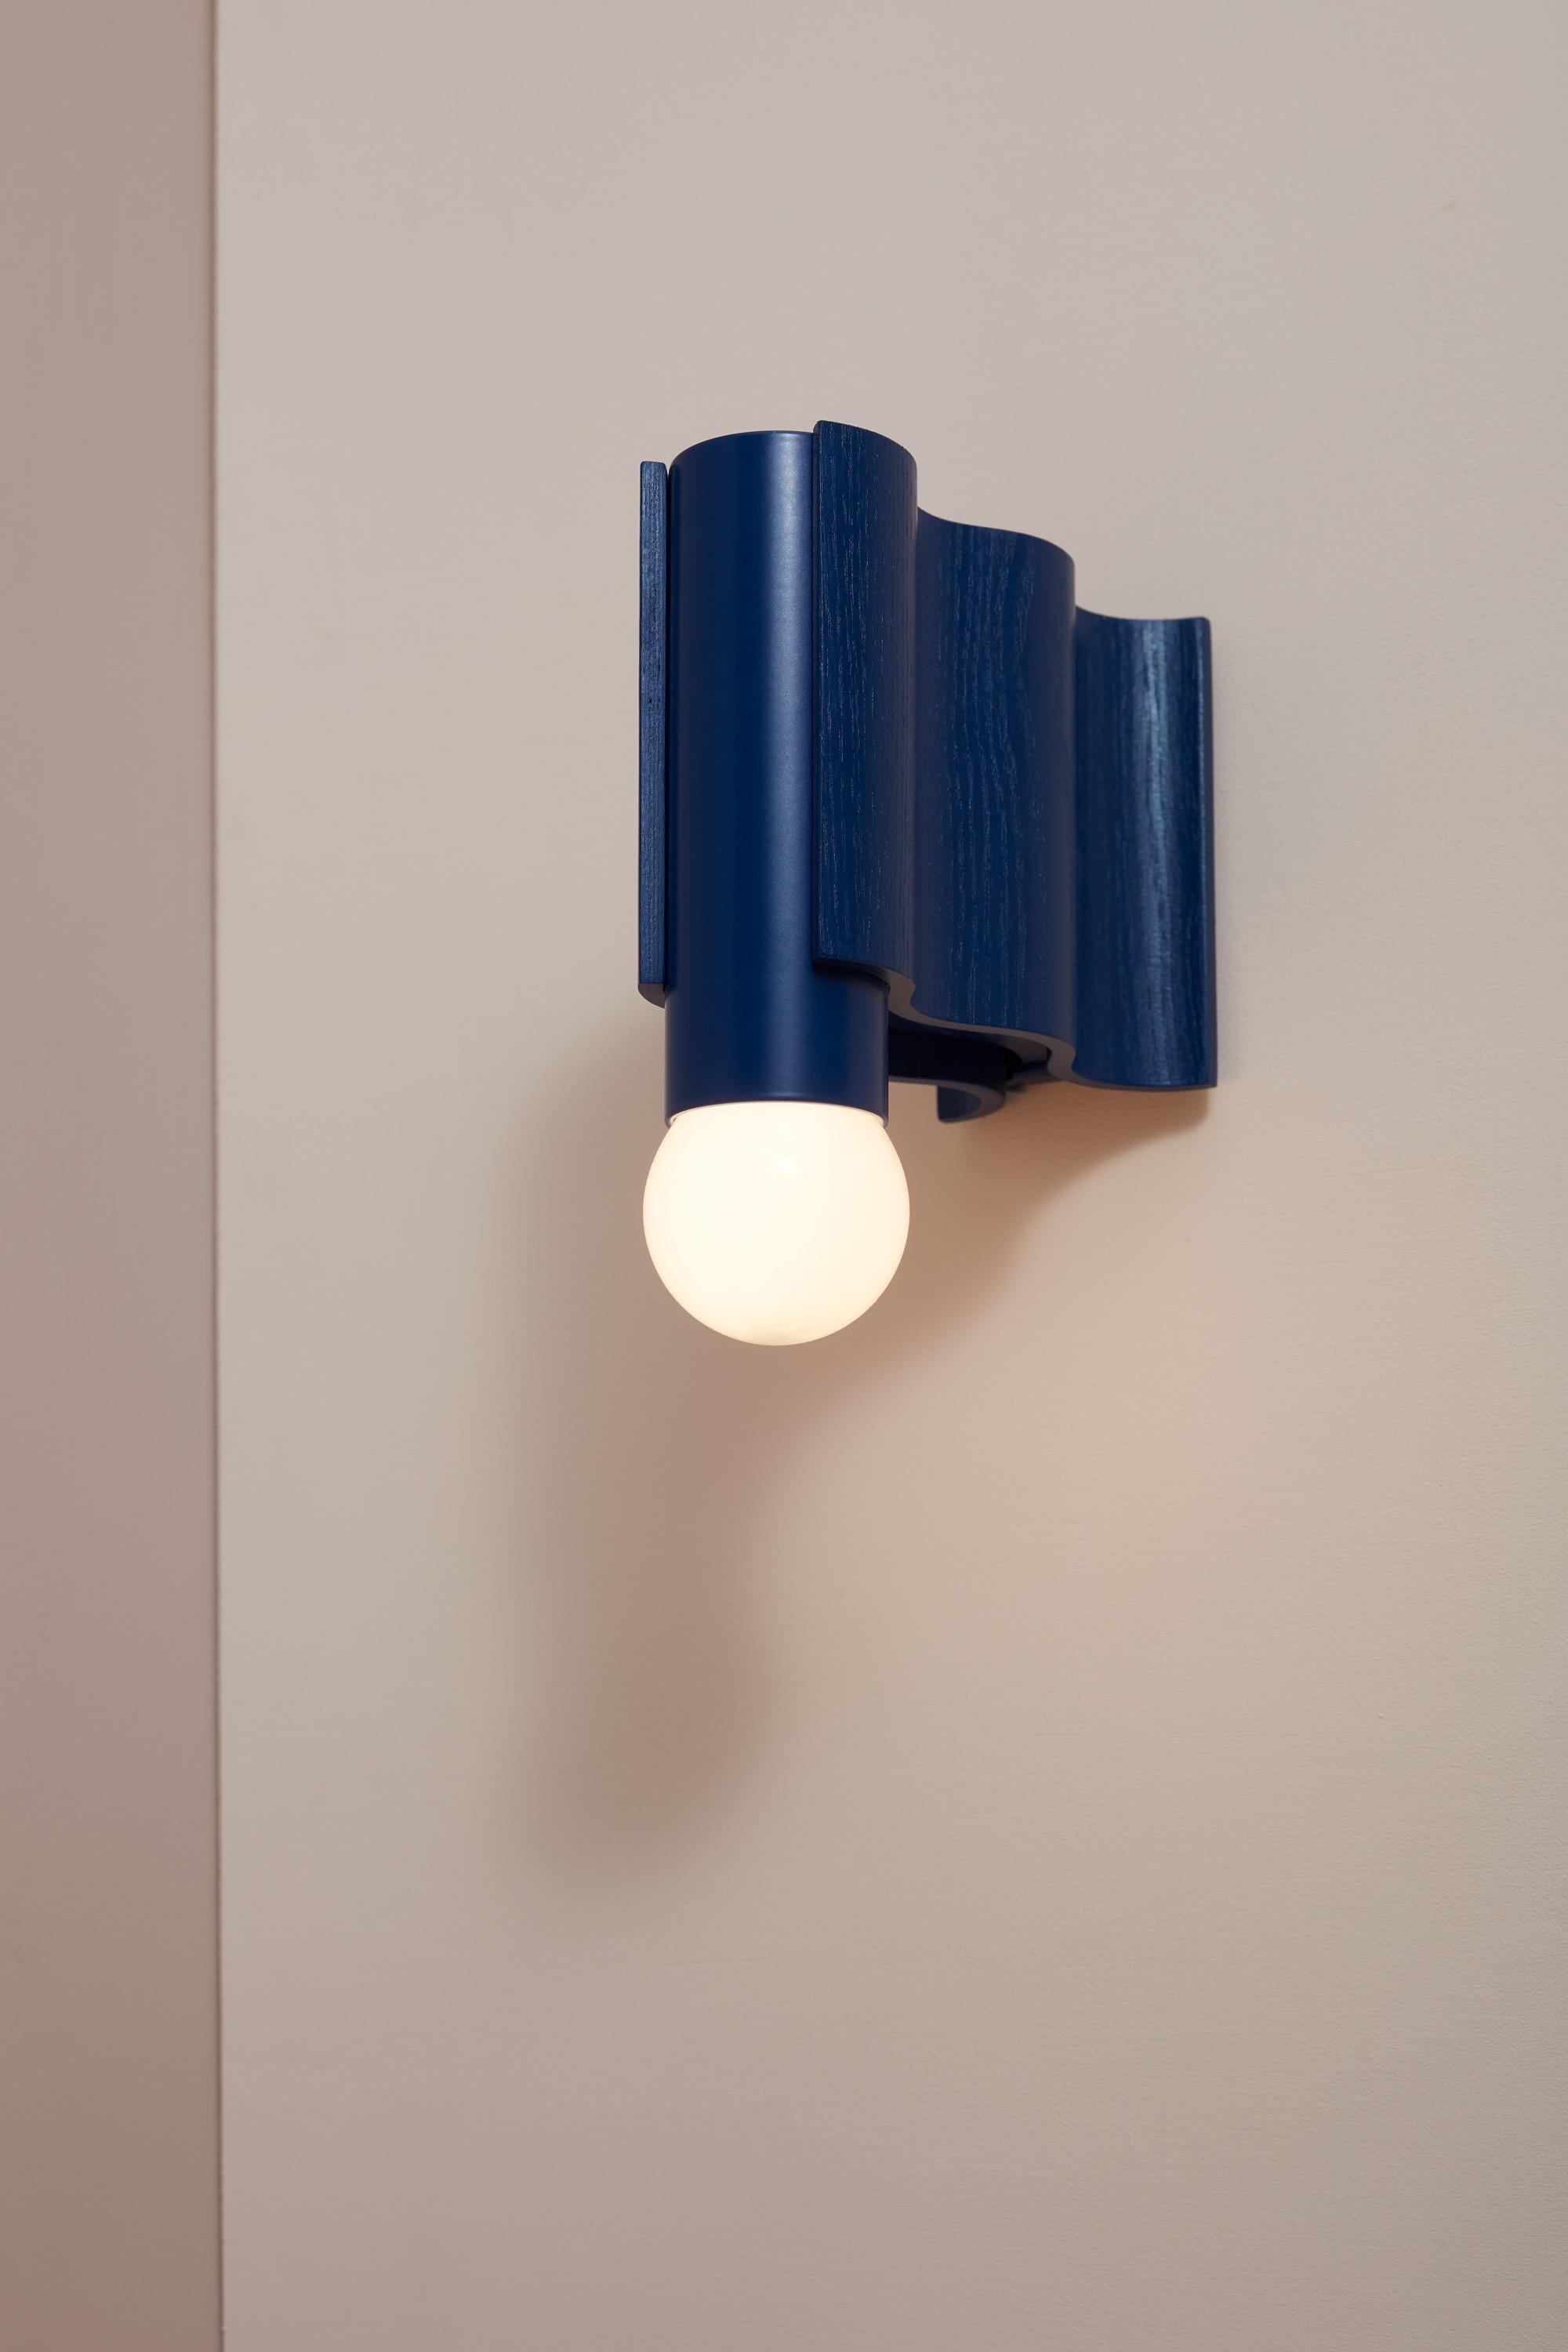 Double Corrugation Sconce / Wall Light in Natural Ash Veneer and Sapphire Blue For Sale 4